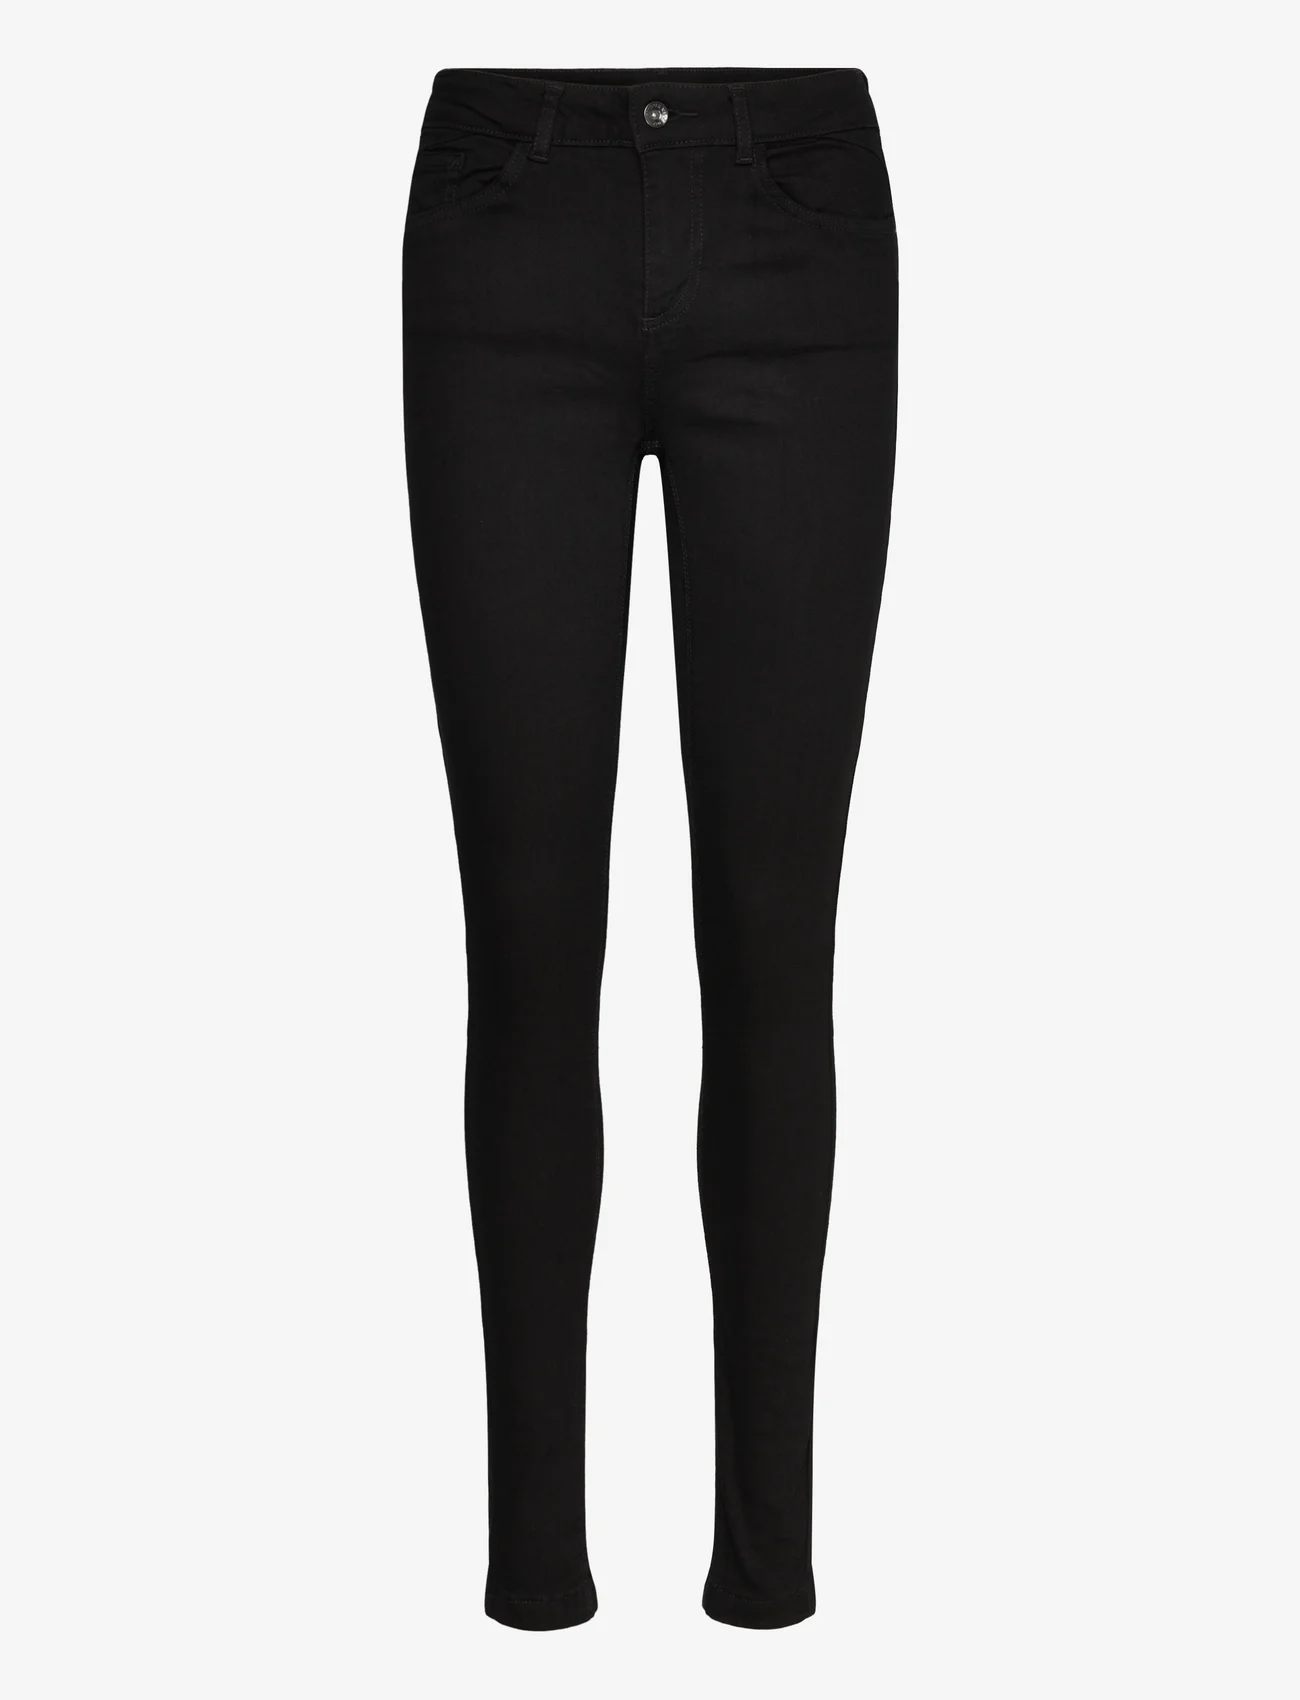 b.young - Lola Luni jeans - - slim fit jeans - black - 0